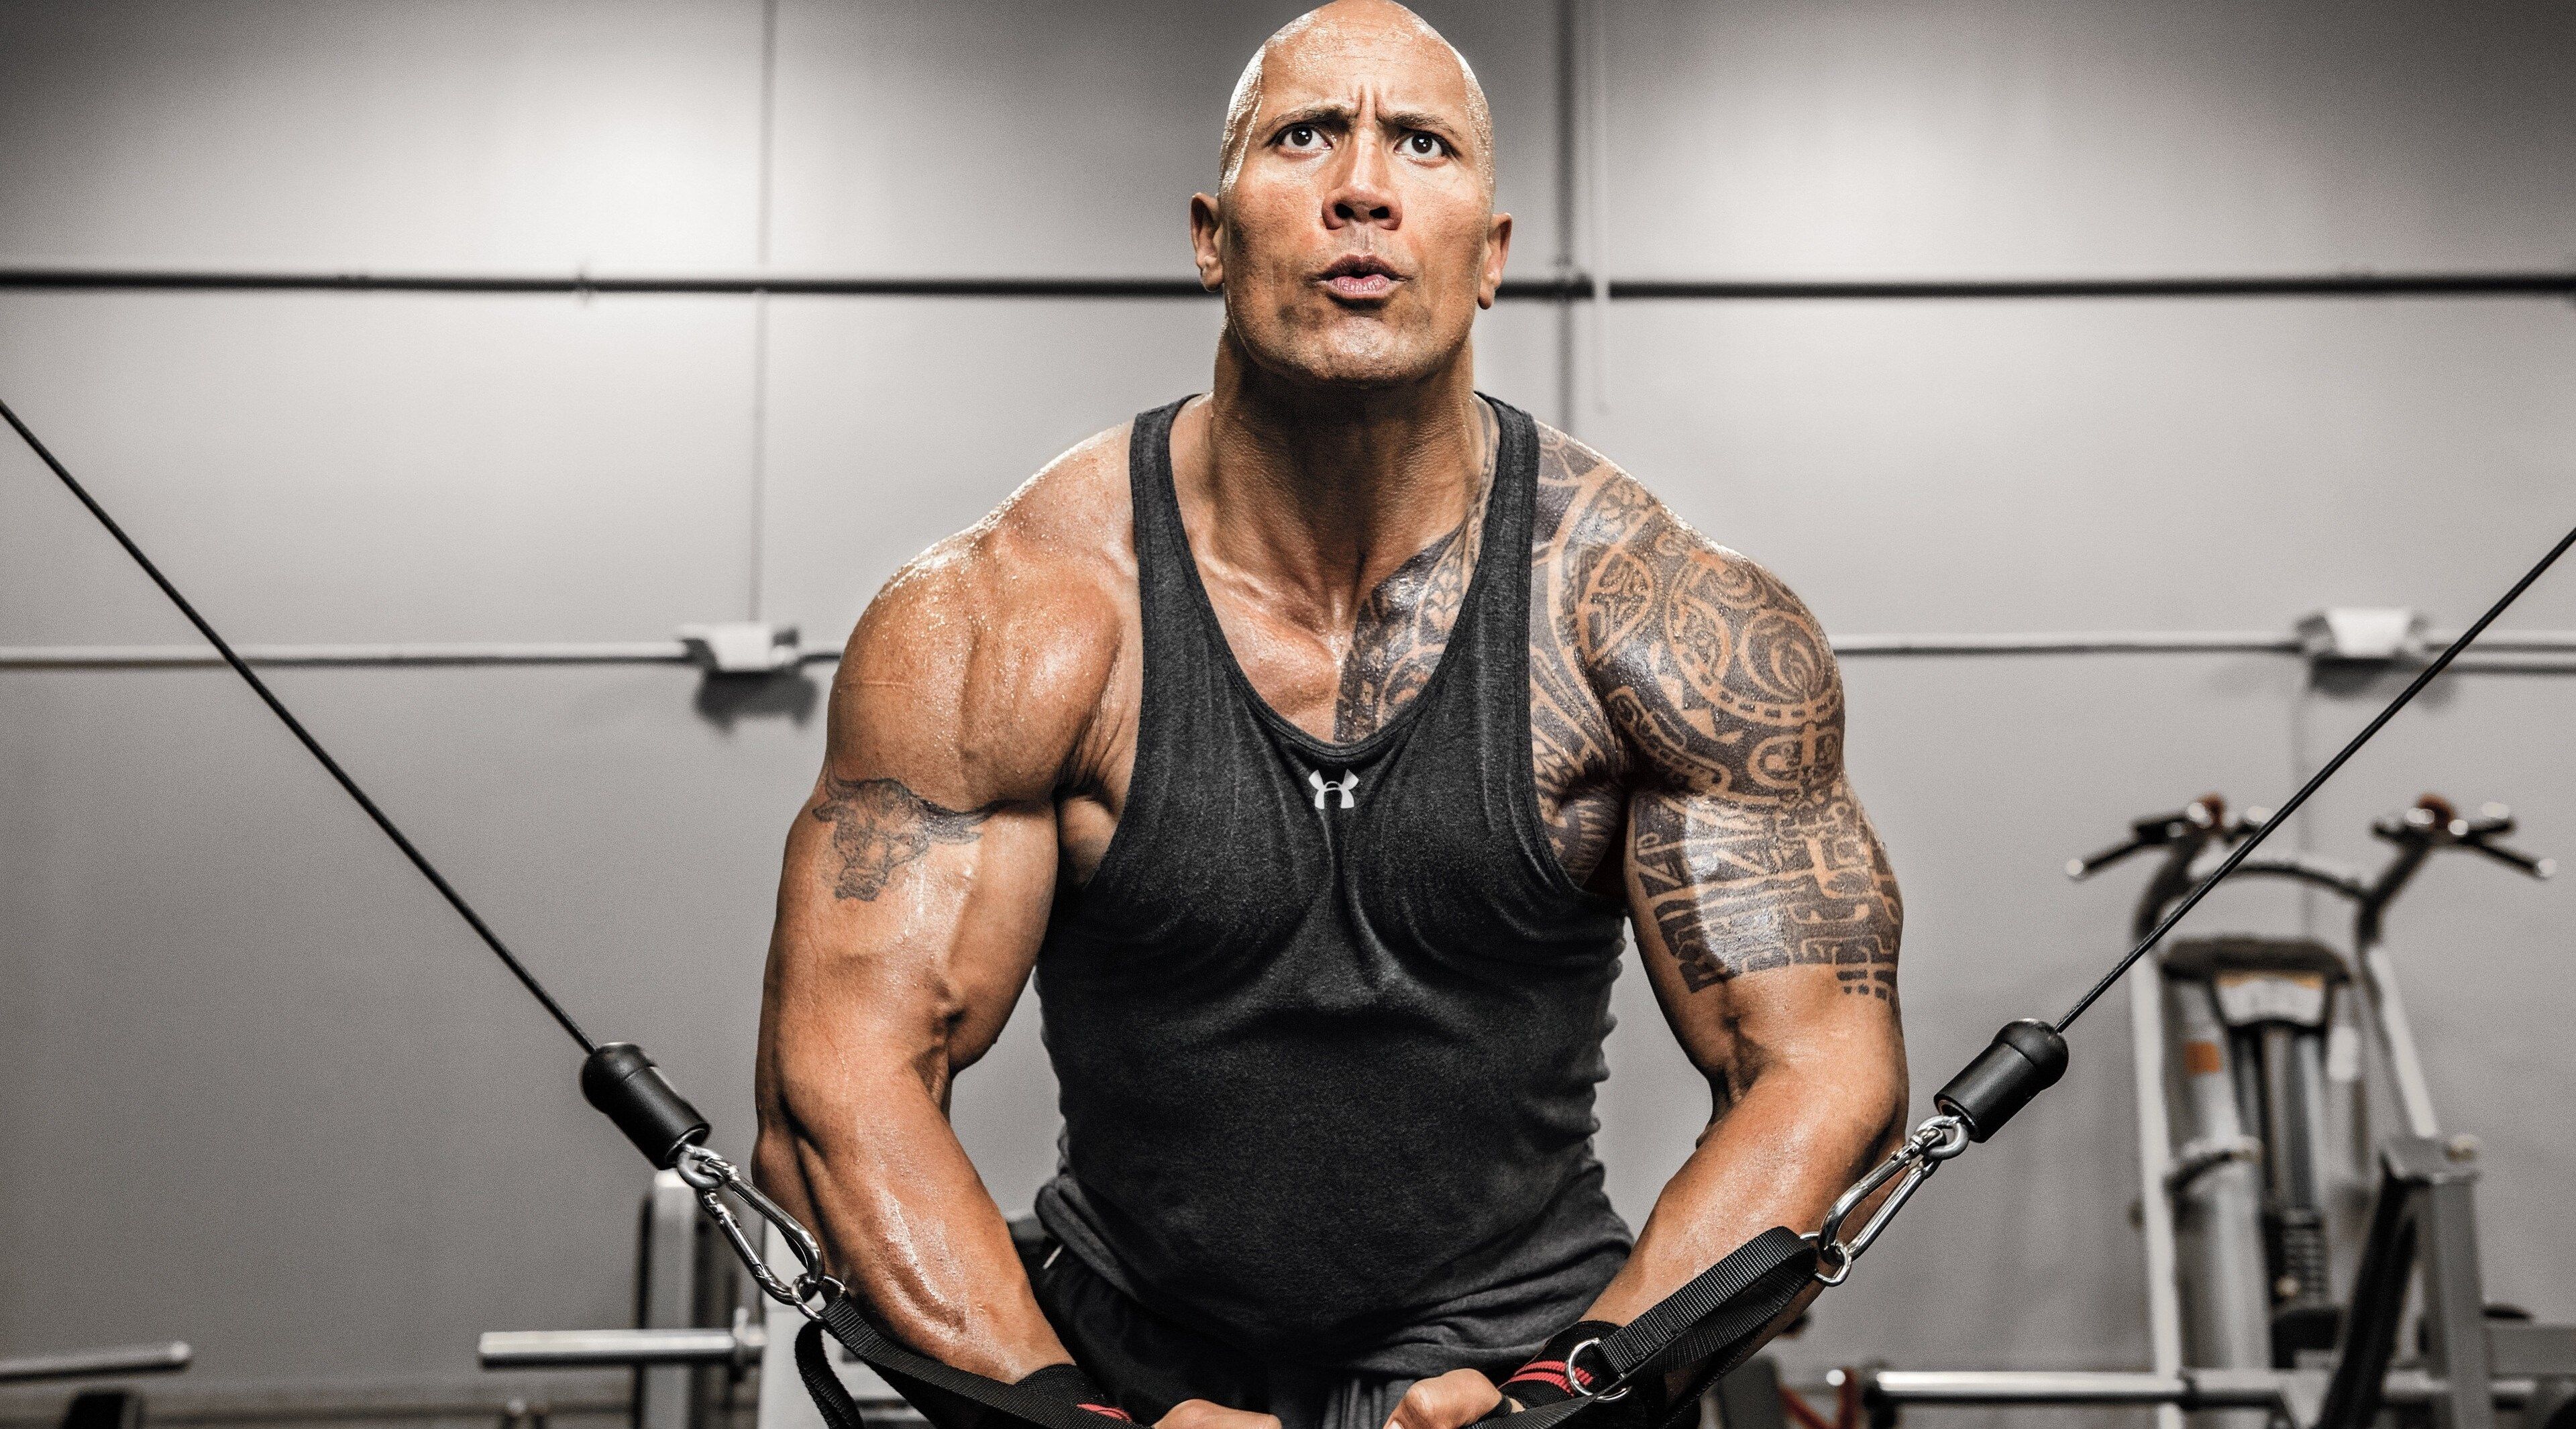 Discover The Rock’s Daily Exercise Routine, Designed To Help You Attain Muscles As Firm As His. – The Rock